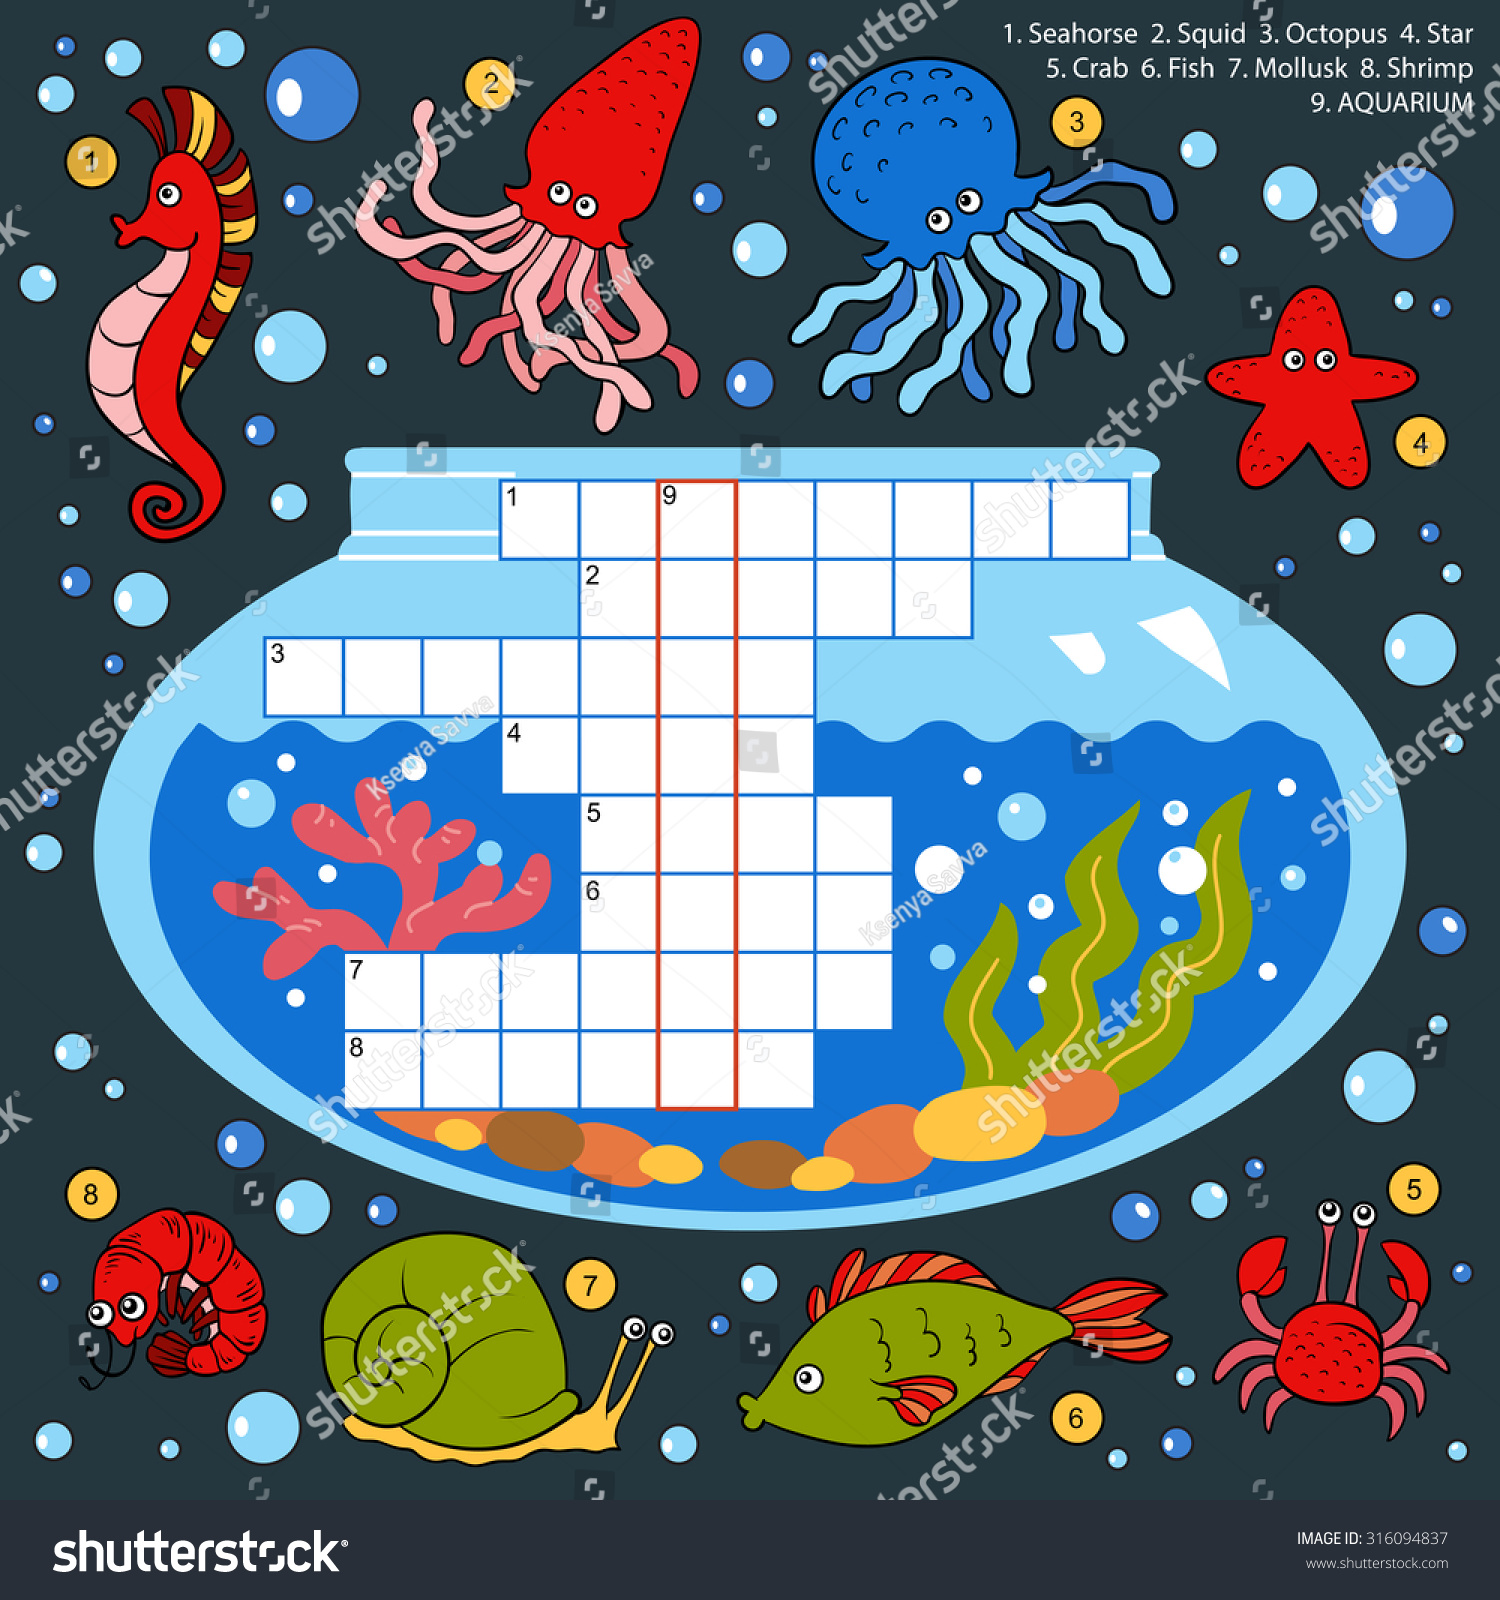 Tropical Game Fish Crossword Clue